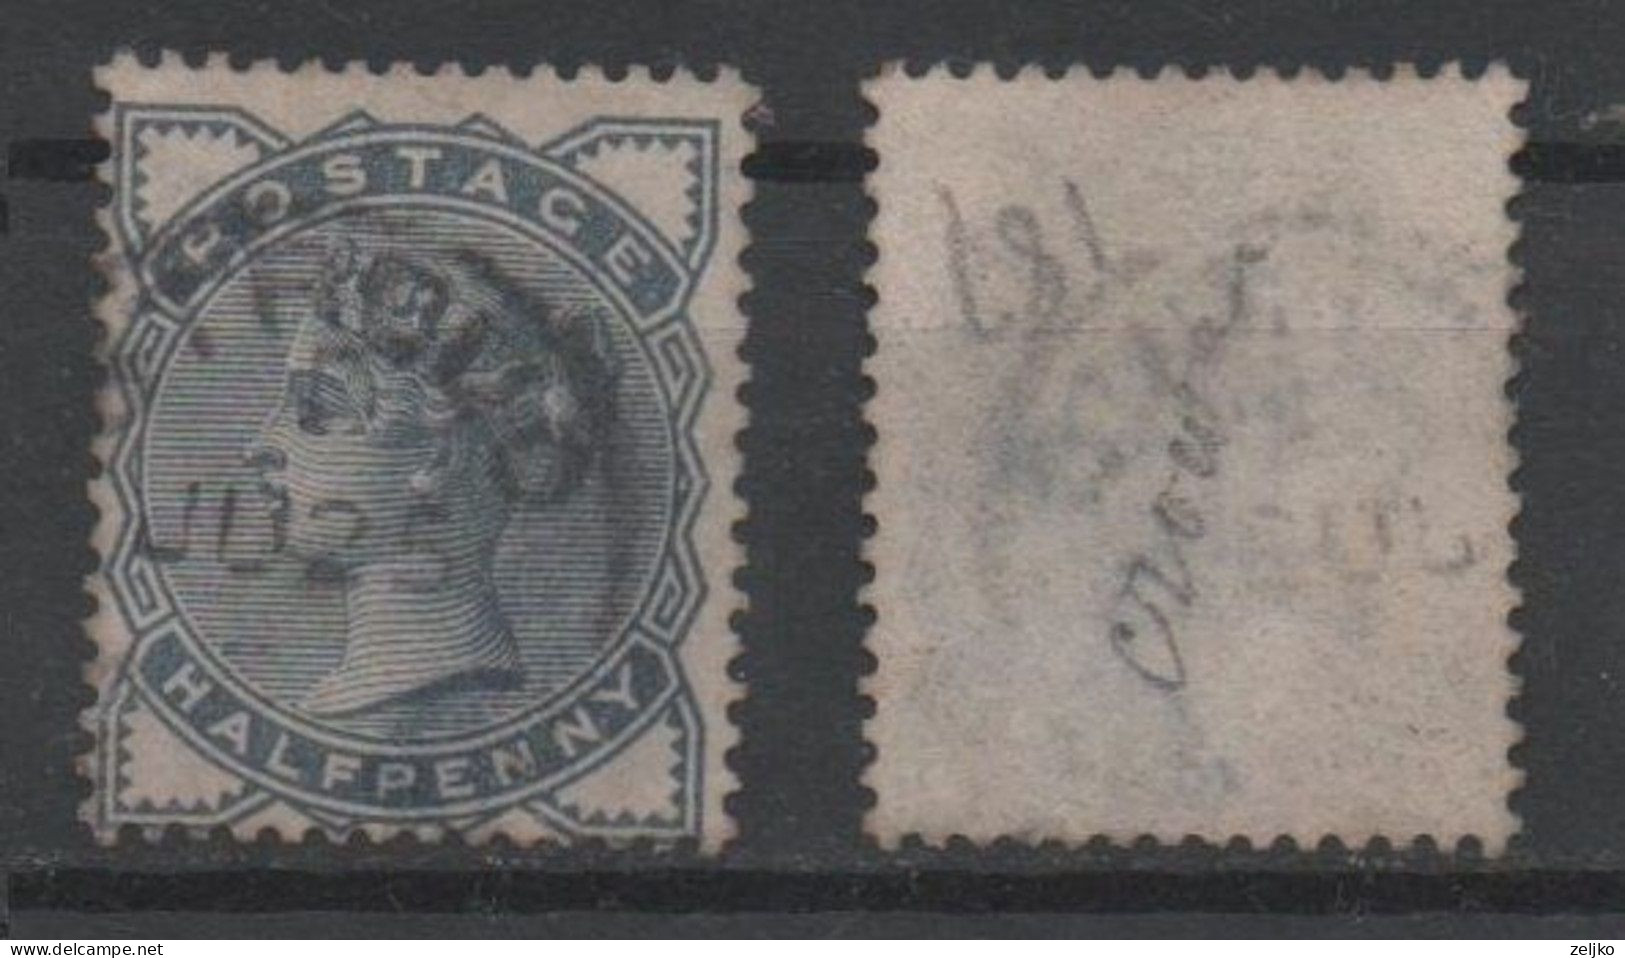 UK, GB, Great Britain, Used, 1883, Michel 71, C.v. 90 € (2) - Used Stamps